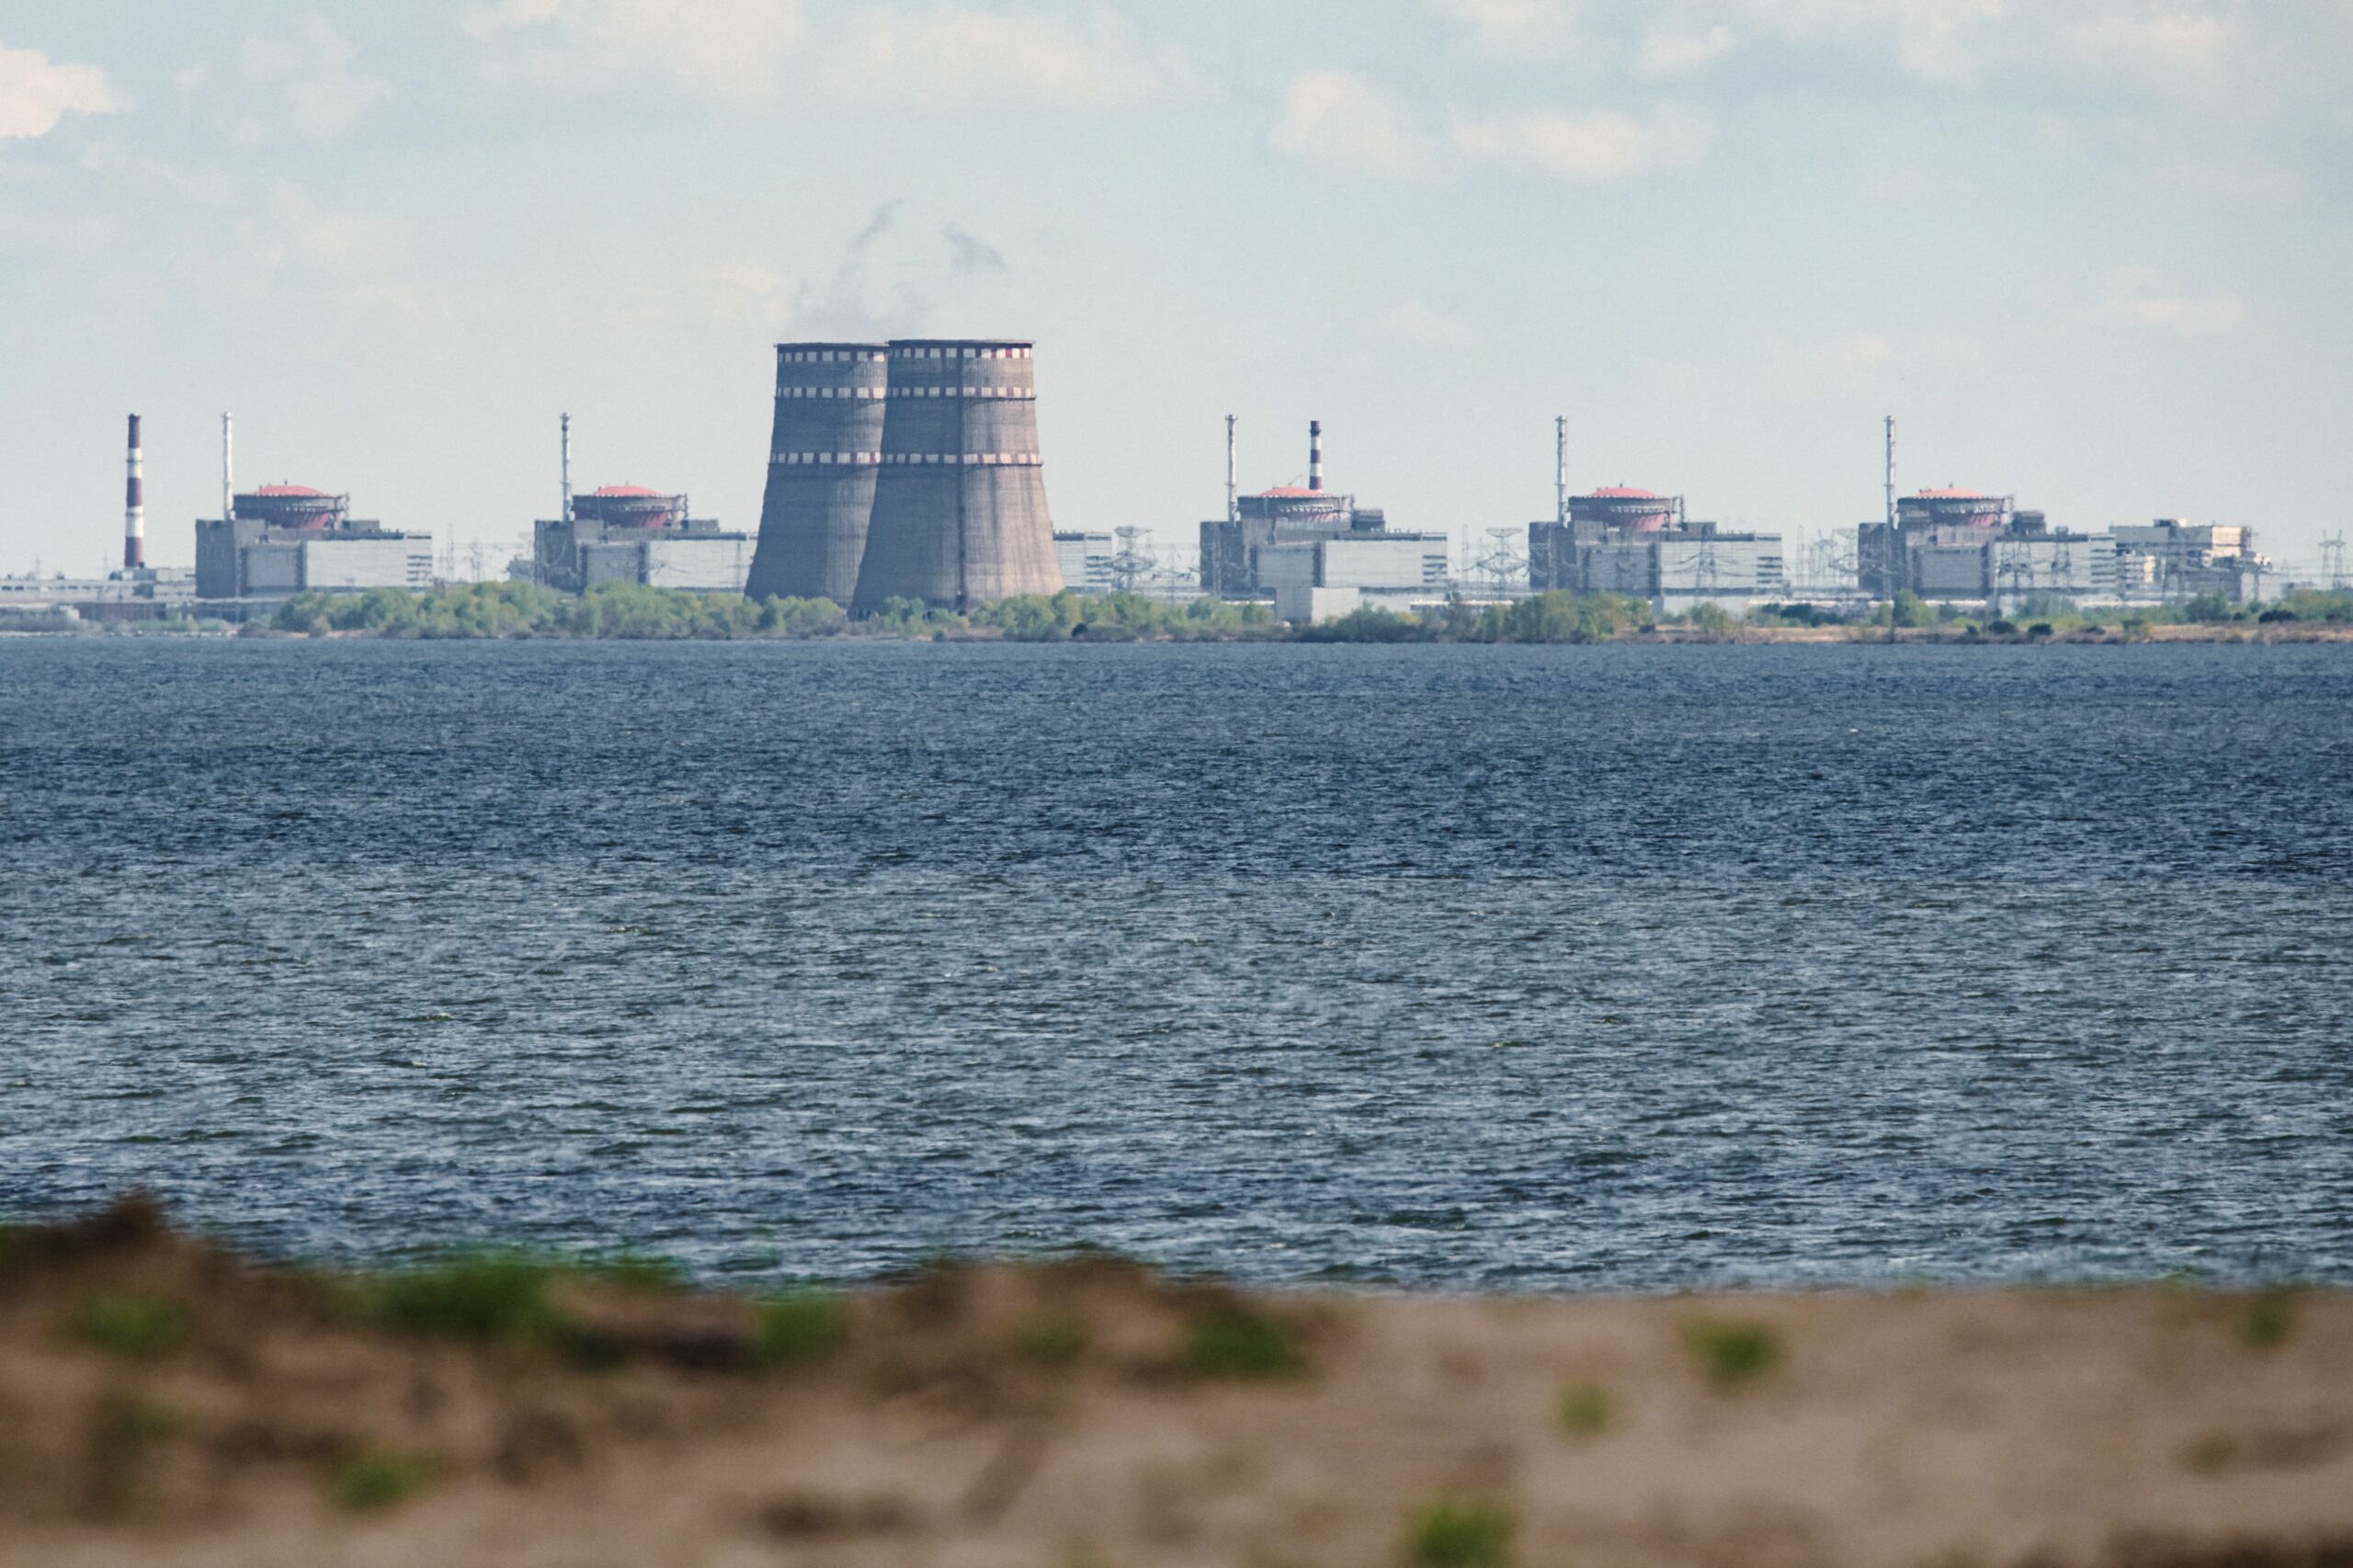 EU, Other States Urge Russia To Withdraw Forces From Ukrainian Nuclear Power Plant